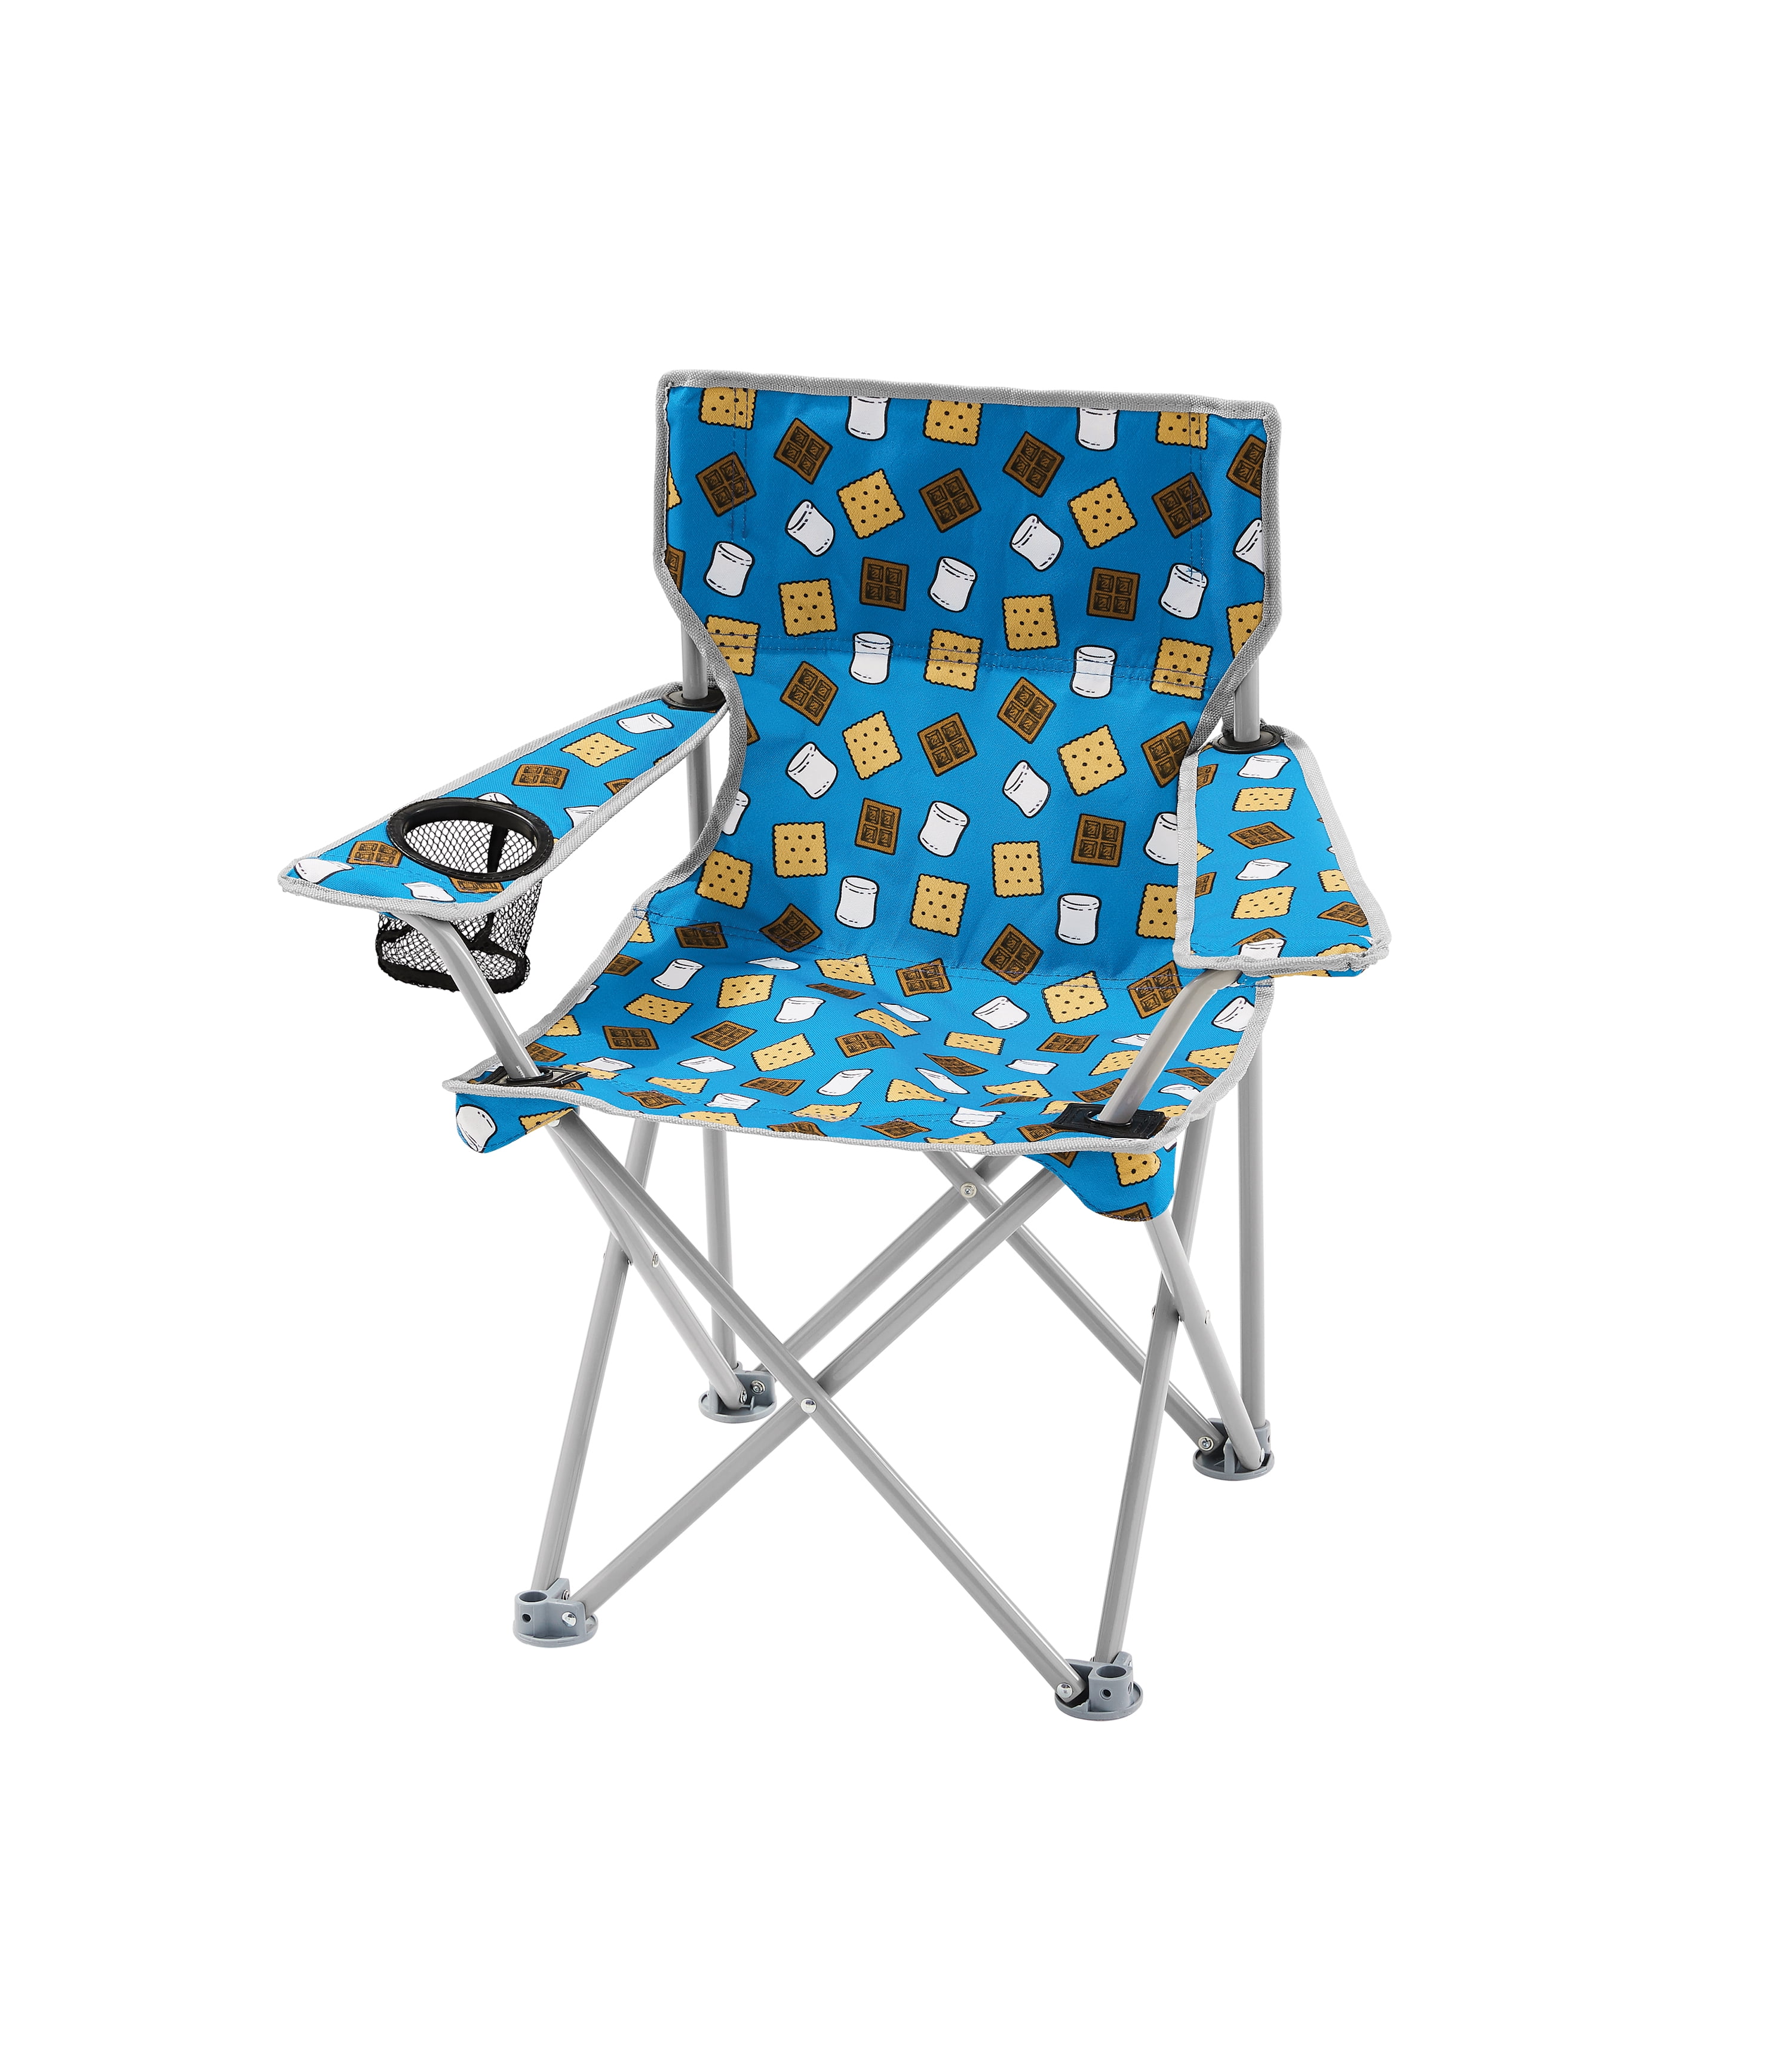 125lb Capacity Crckt Kids Folding Camp Chair with Safety Lock